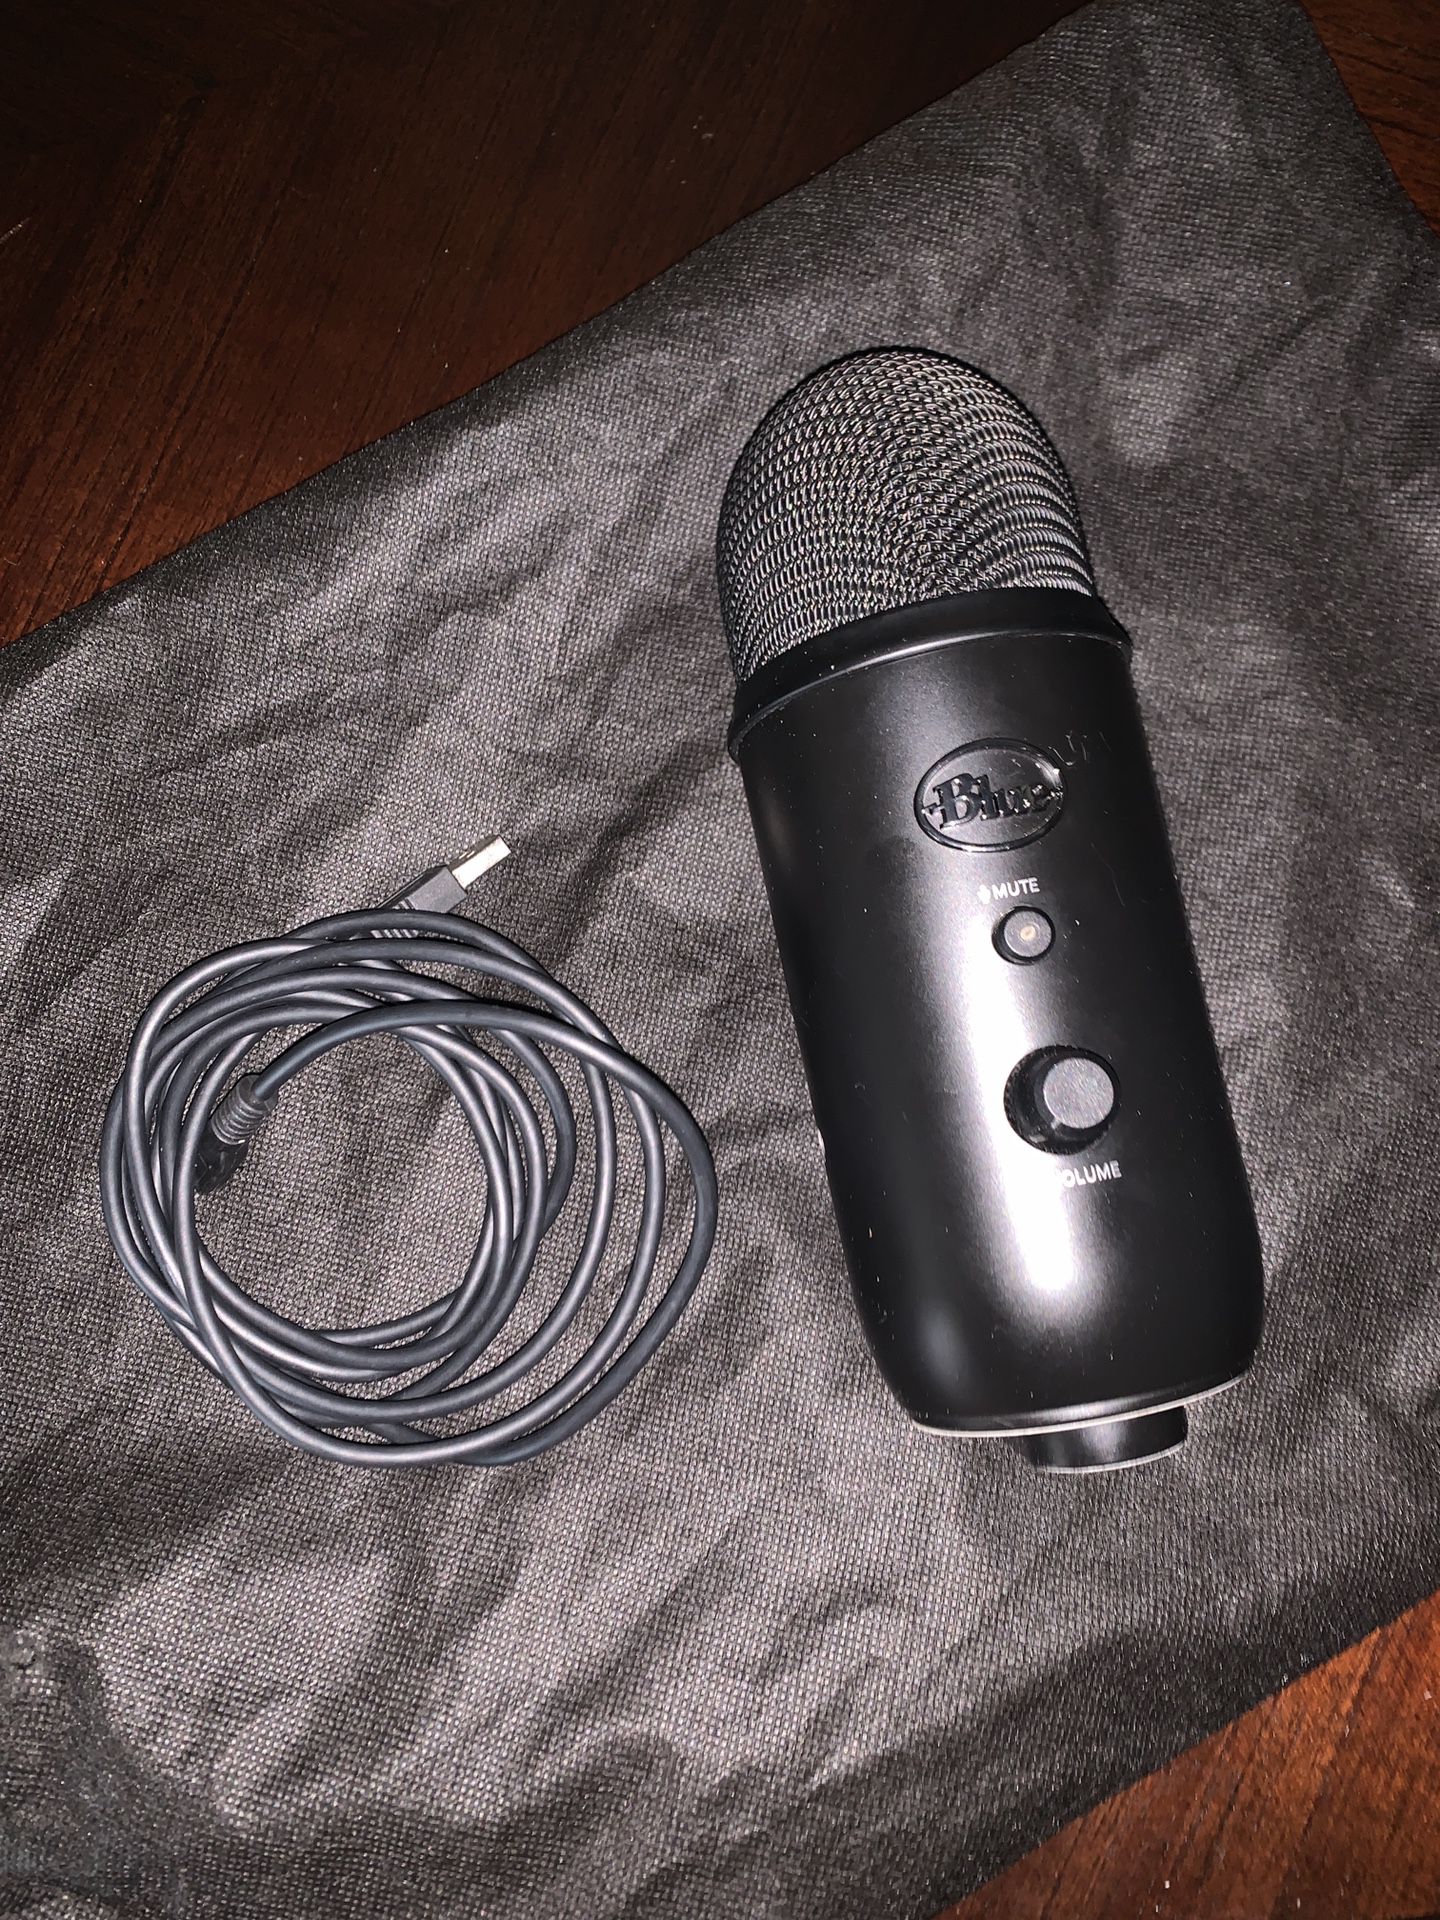 Microphone　in　Shield　Blue　TX　Dallas,　for　Pop　with　Yeti　Sale　USB　Isolation　Filter　OfferUp